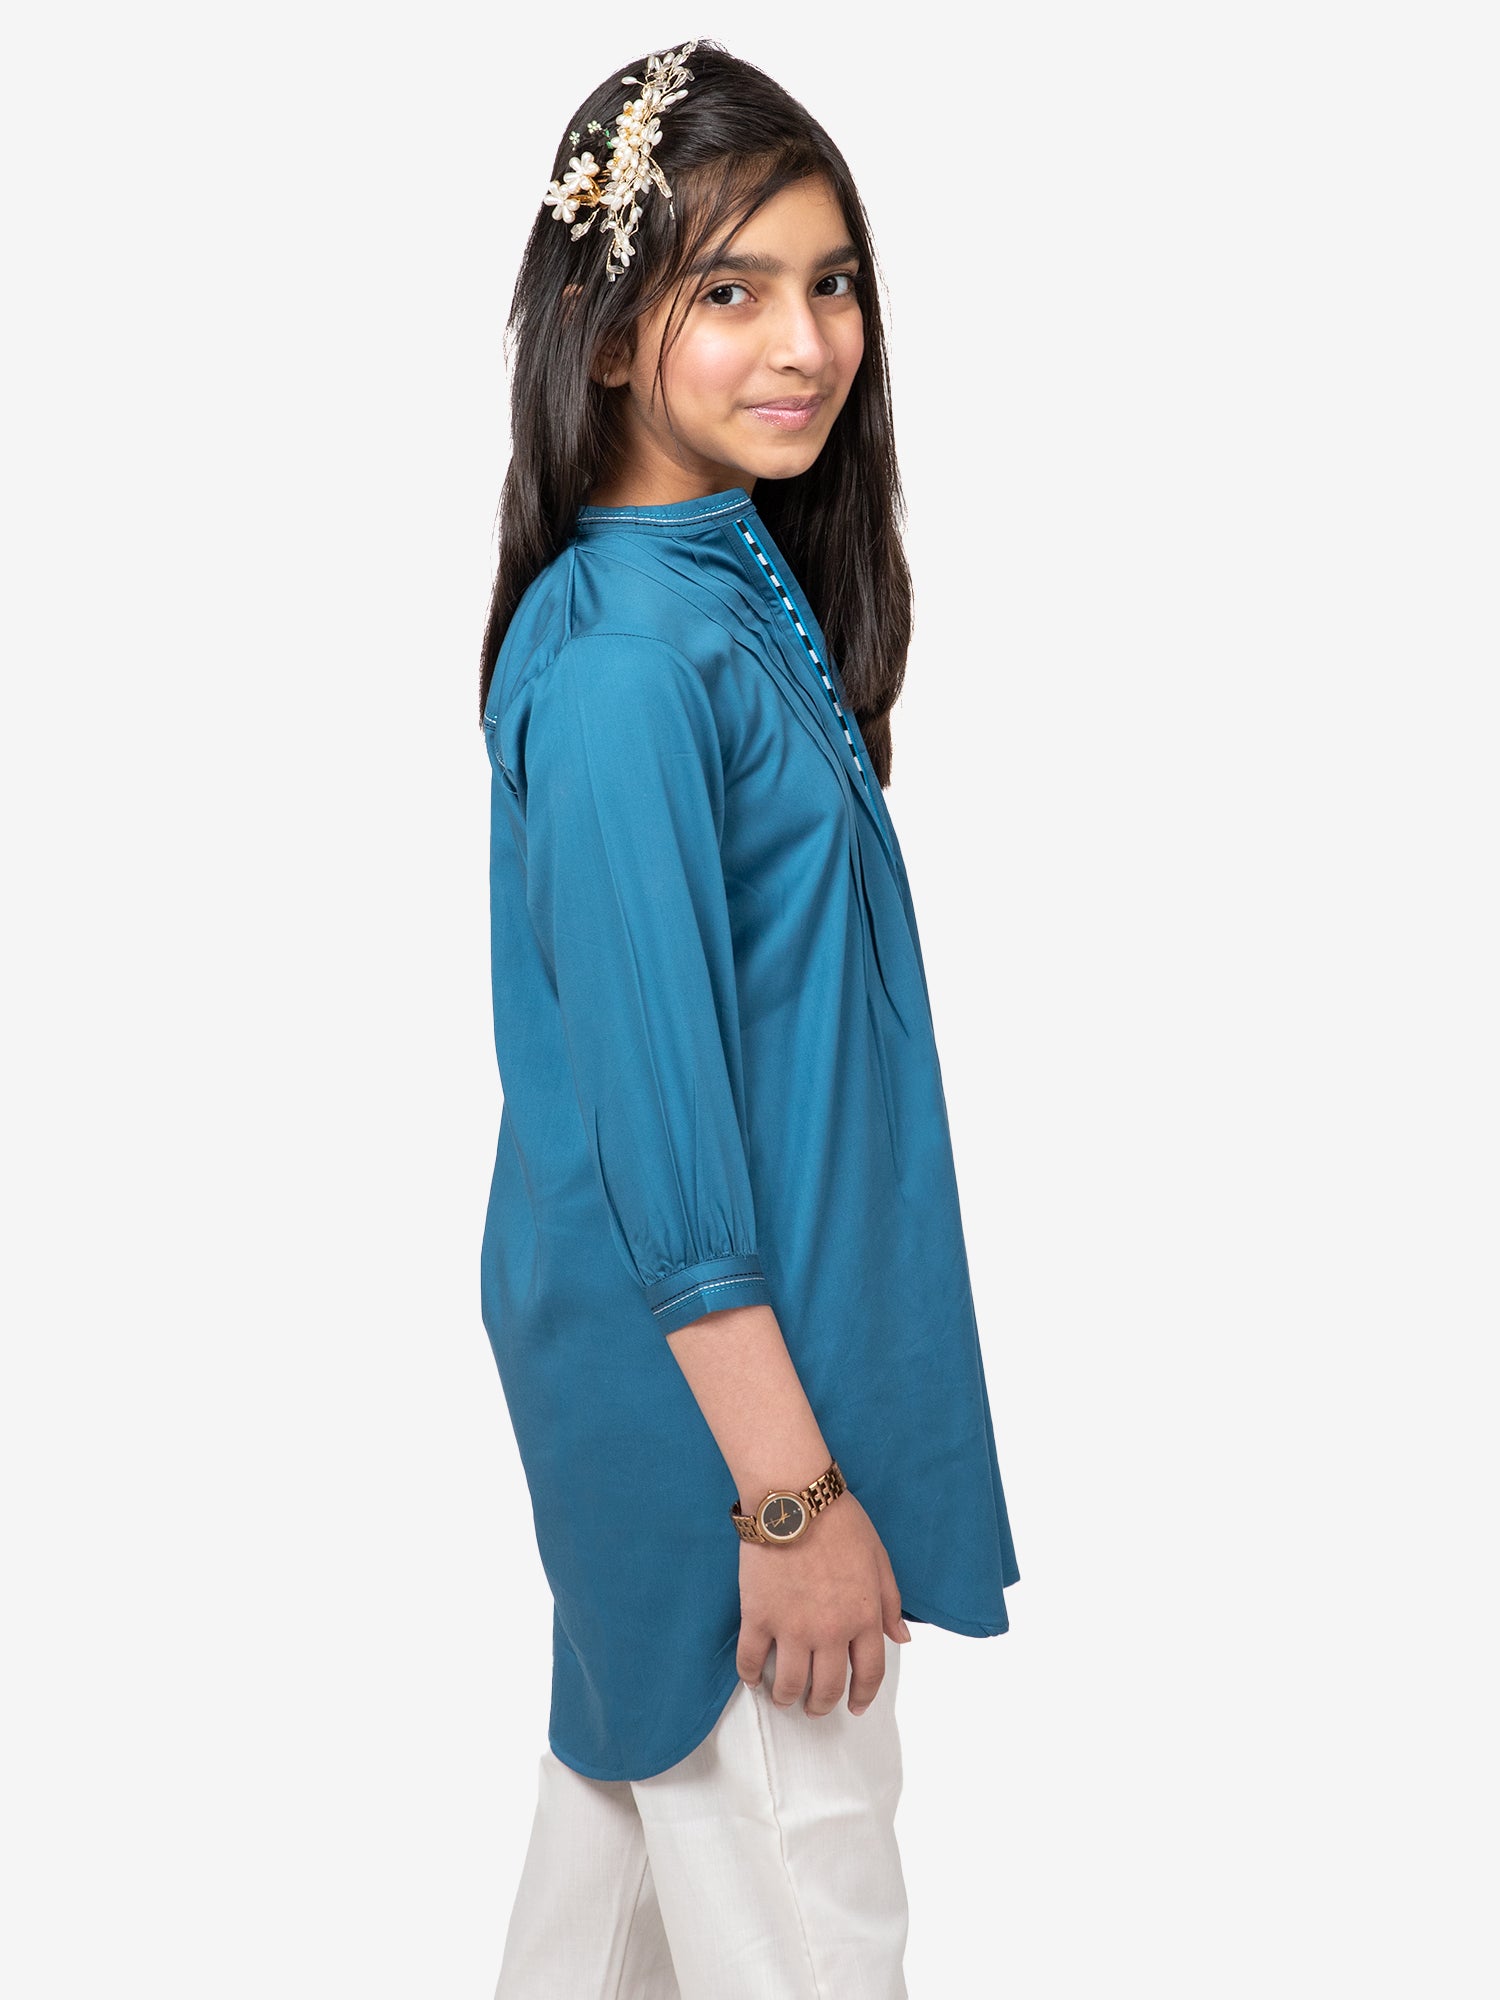 Girls Tunic Top By Velvour ART# VG0018-B - Velvour Shop